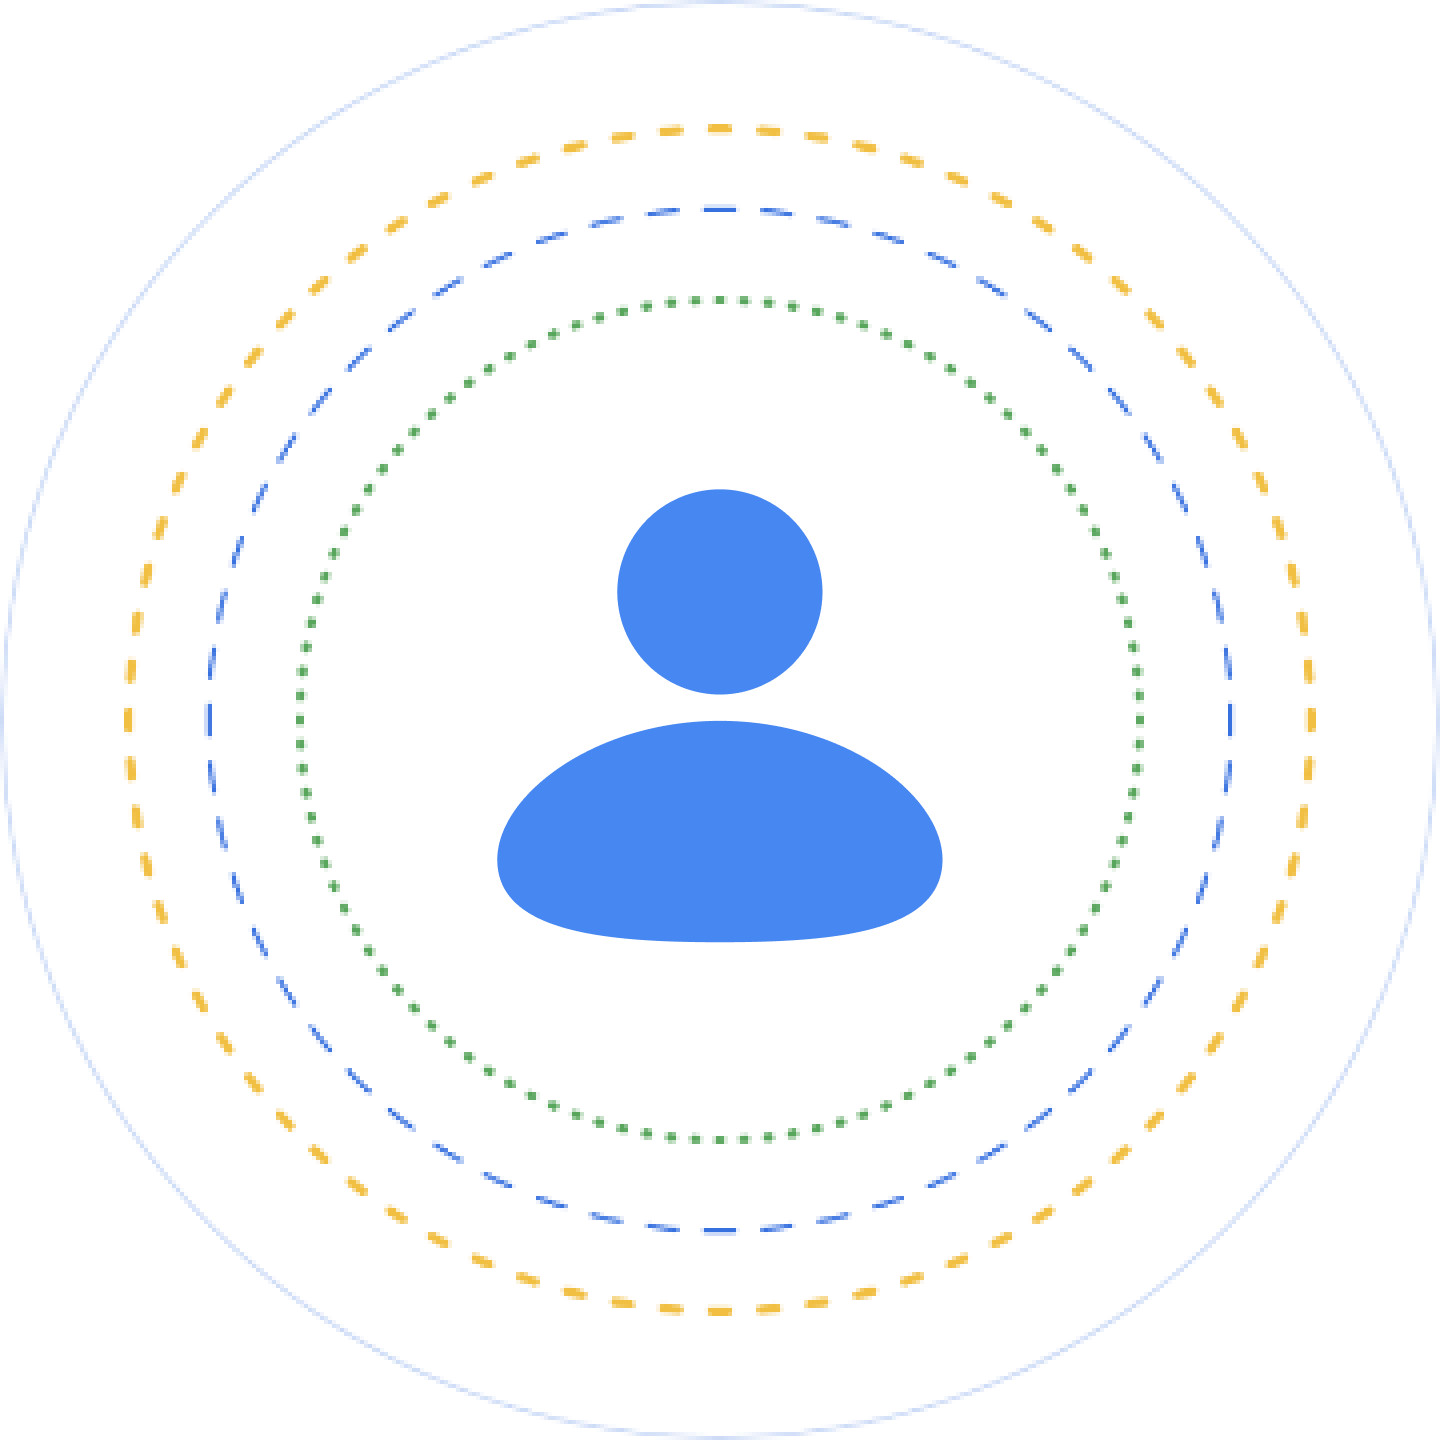 Graphic of person icon within concentric circles